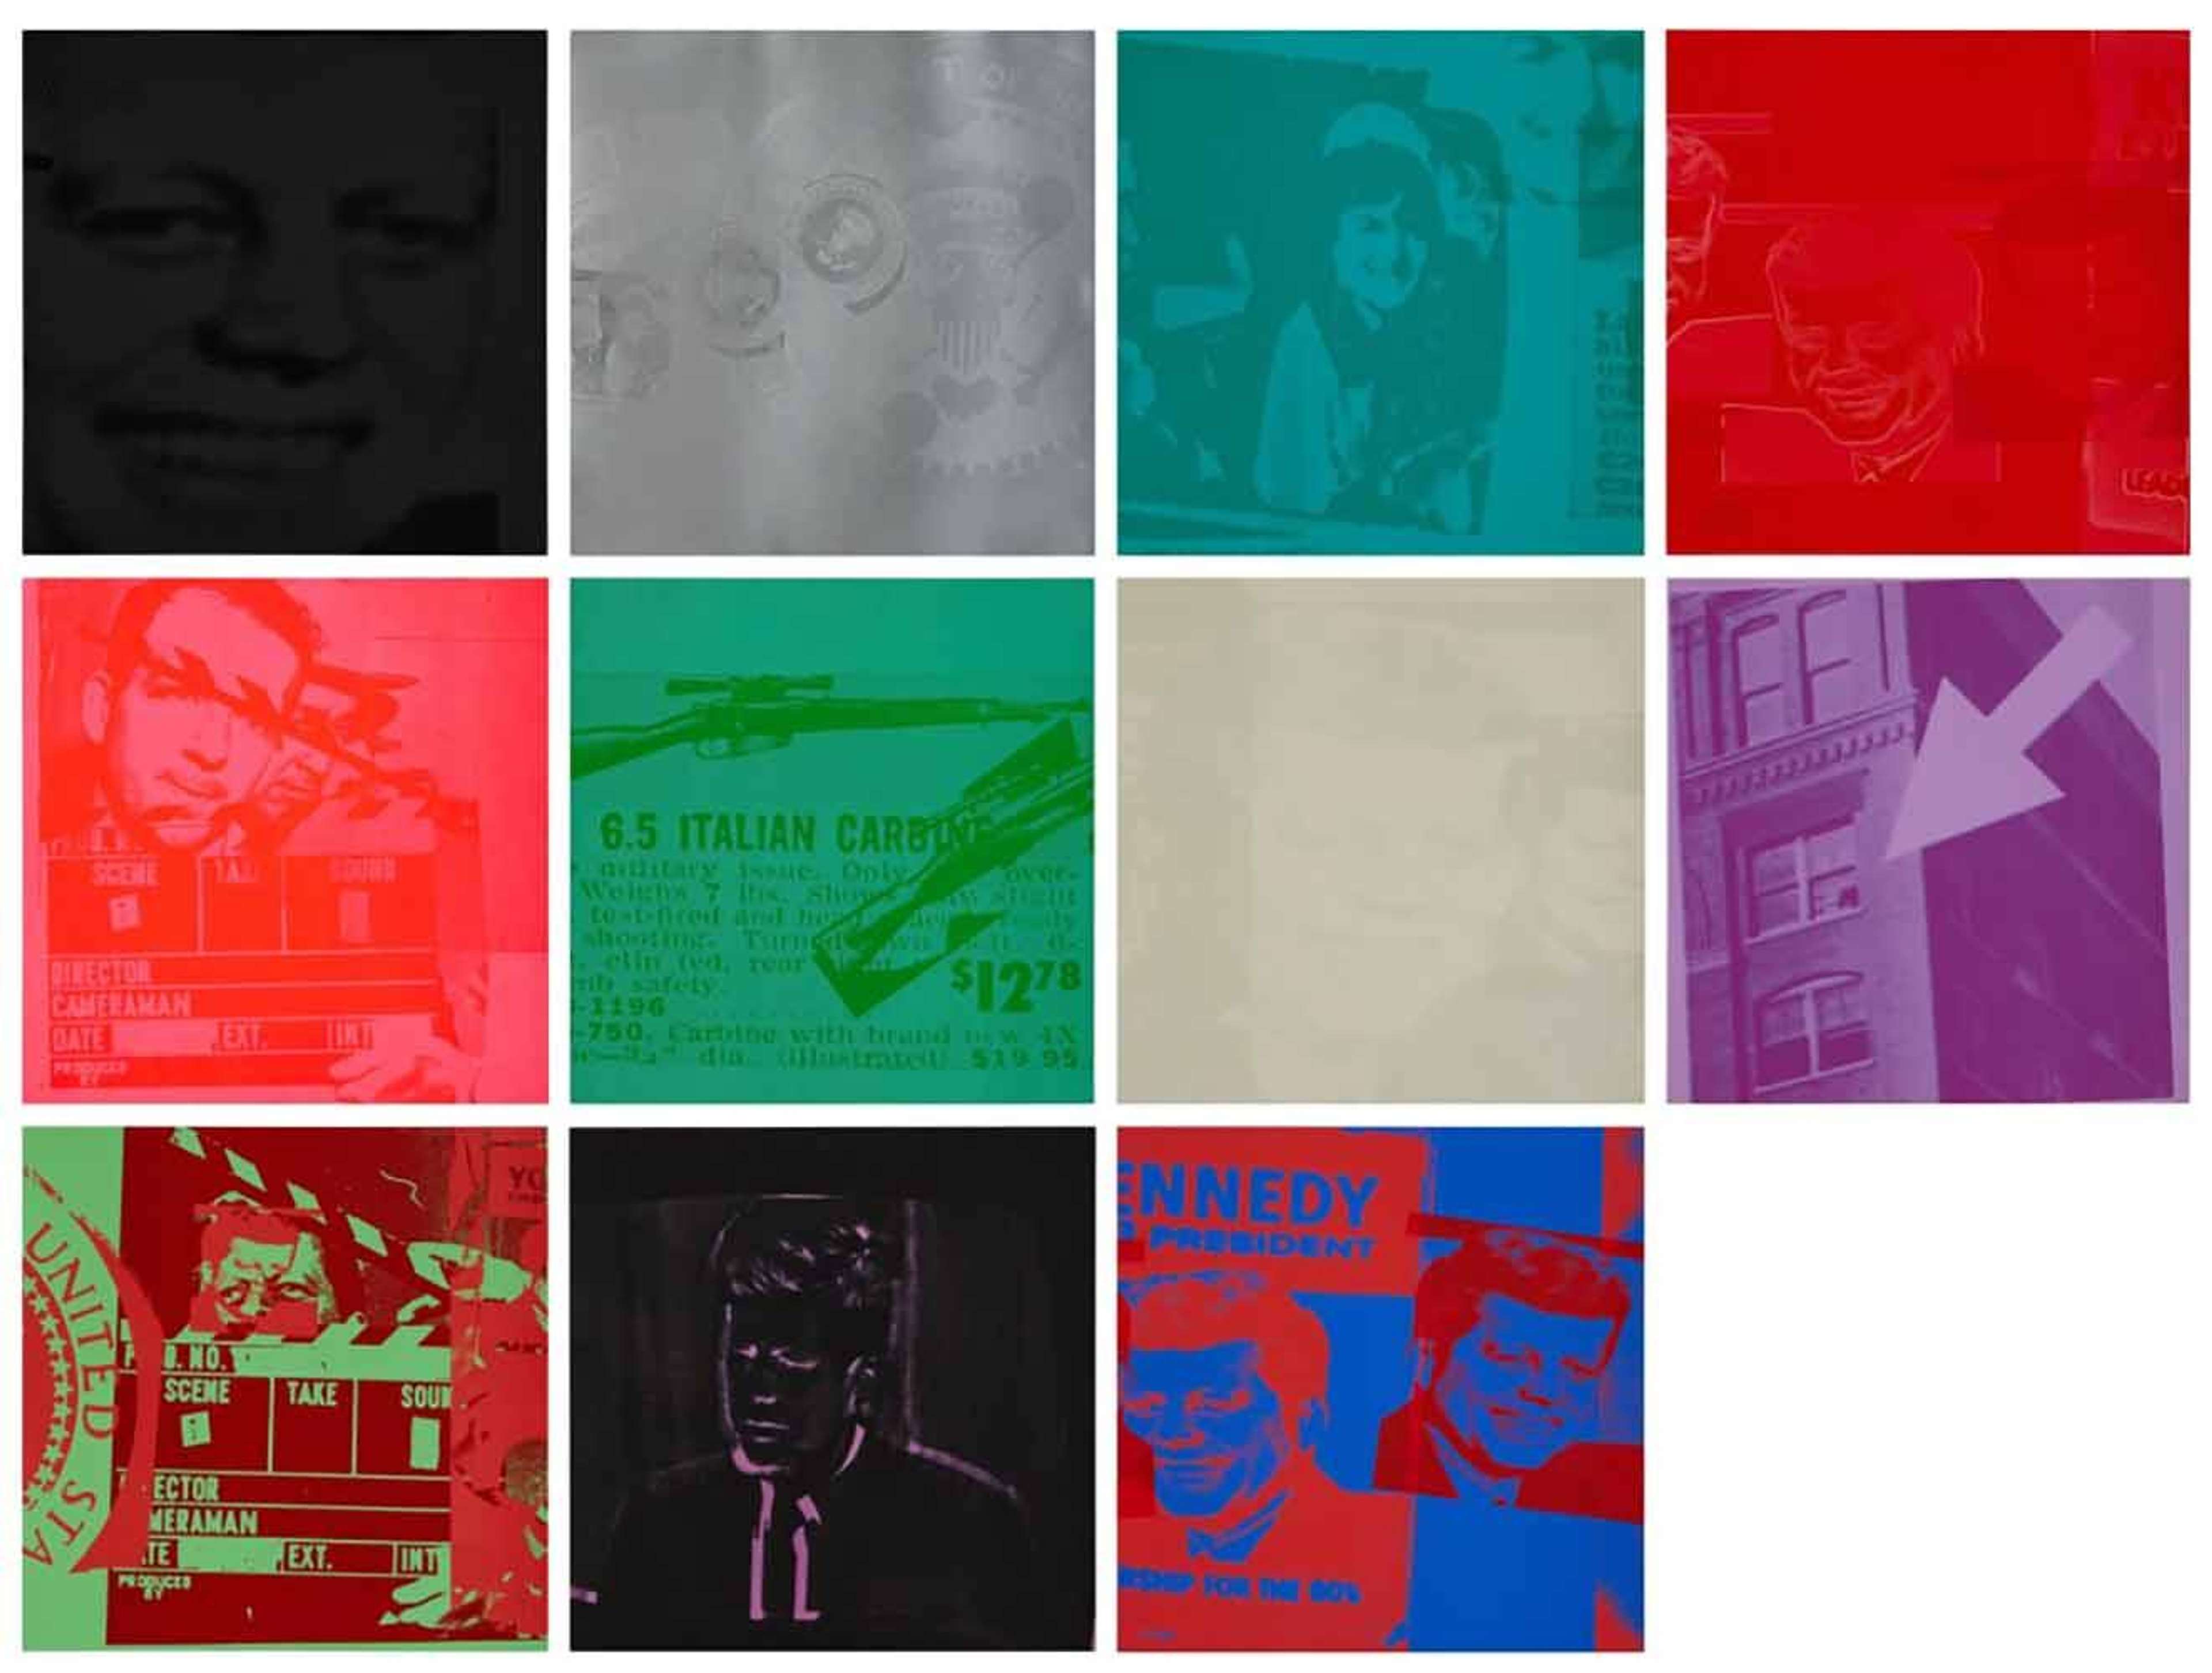 An image of the complete set of prints from Warhol's Flash-November 22 series, showing the events preceding, during and in the aftermath of John F. Kennedy's assassination.